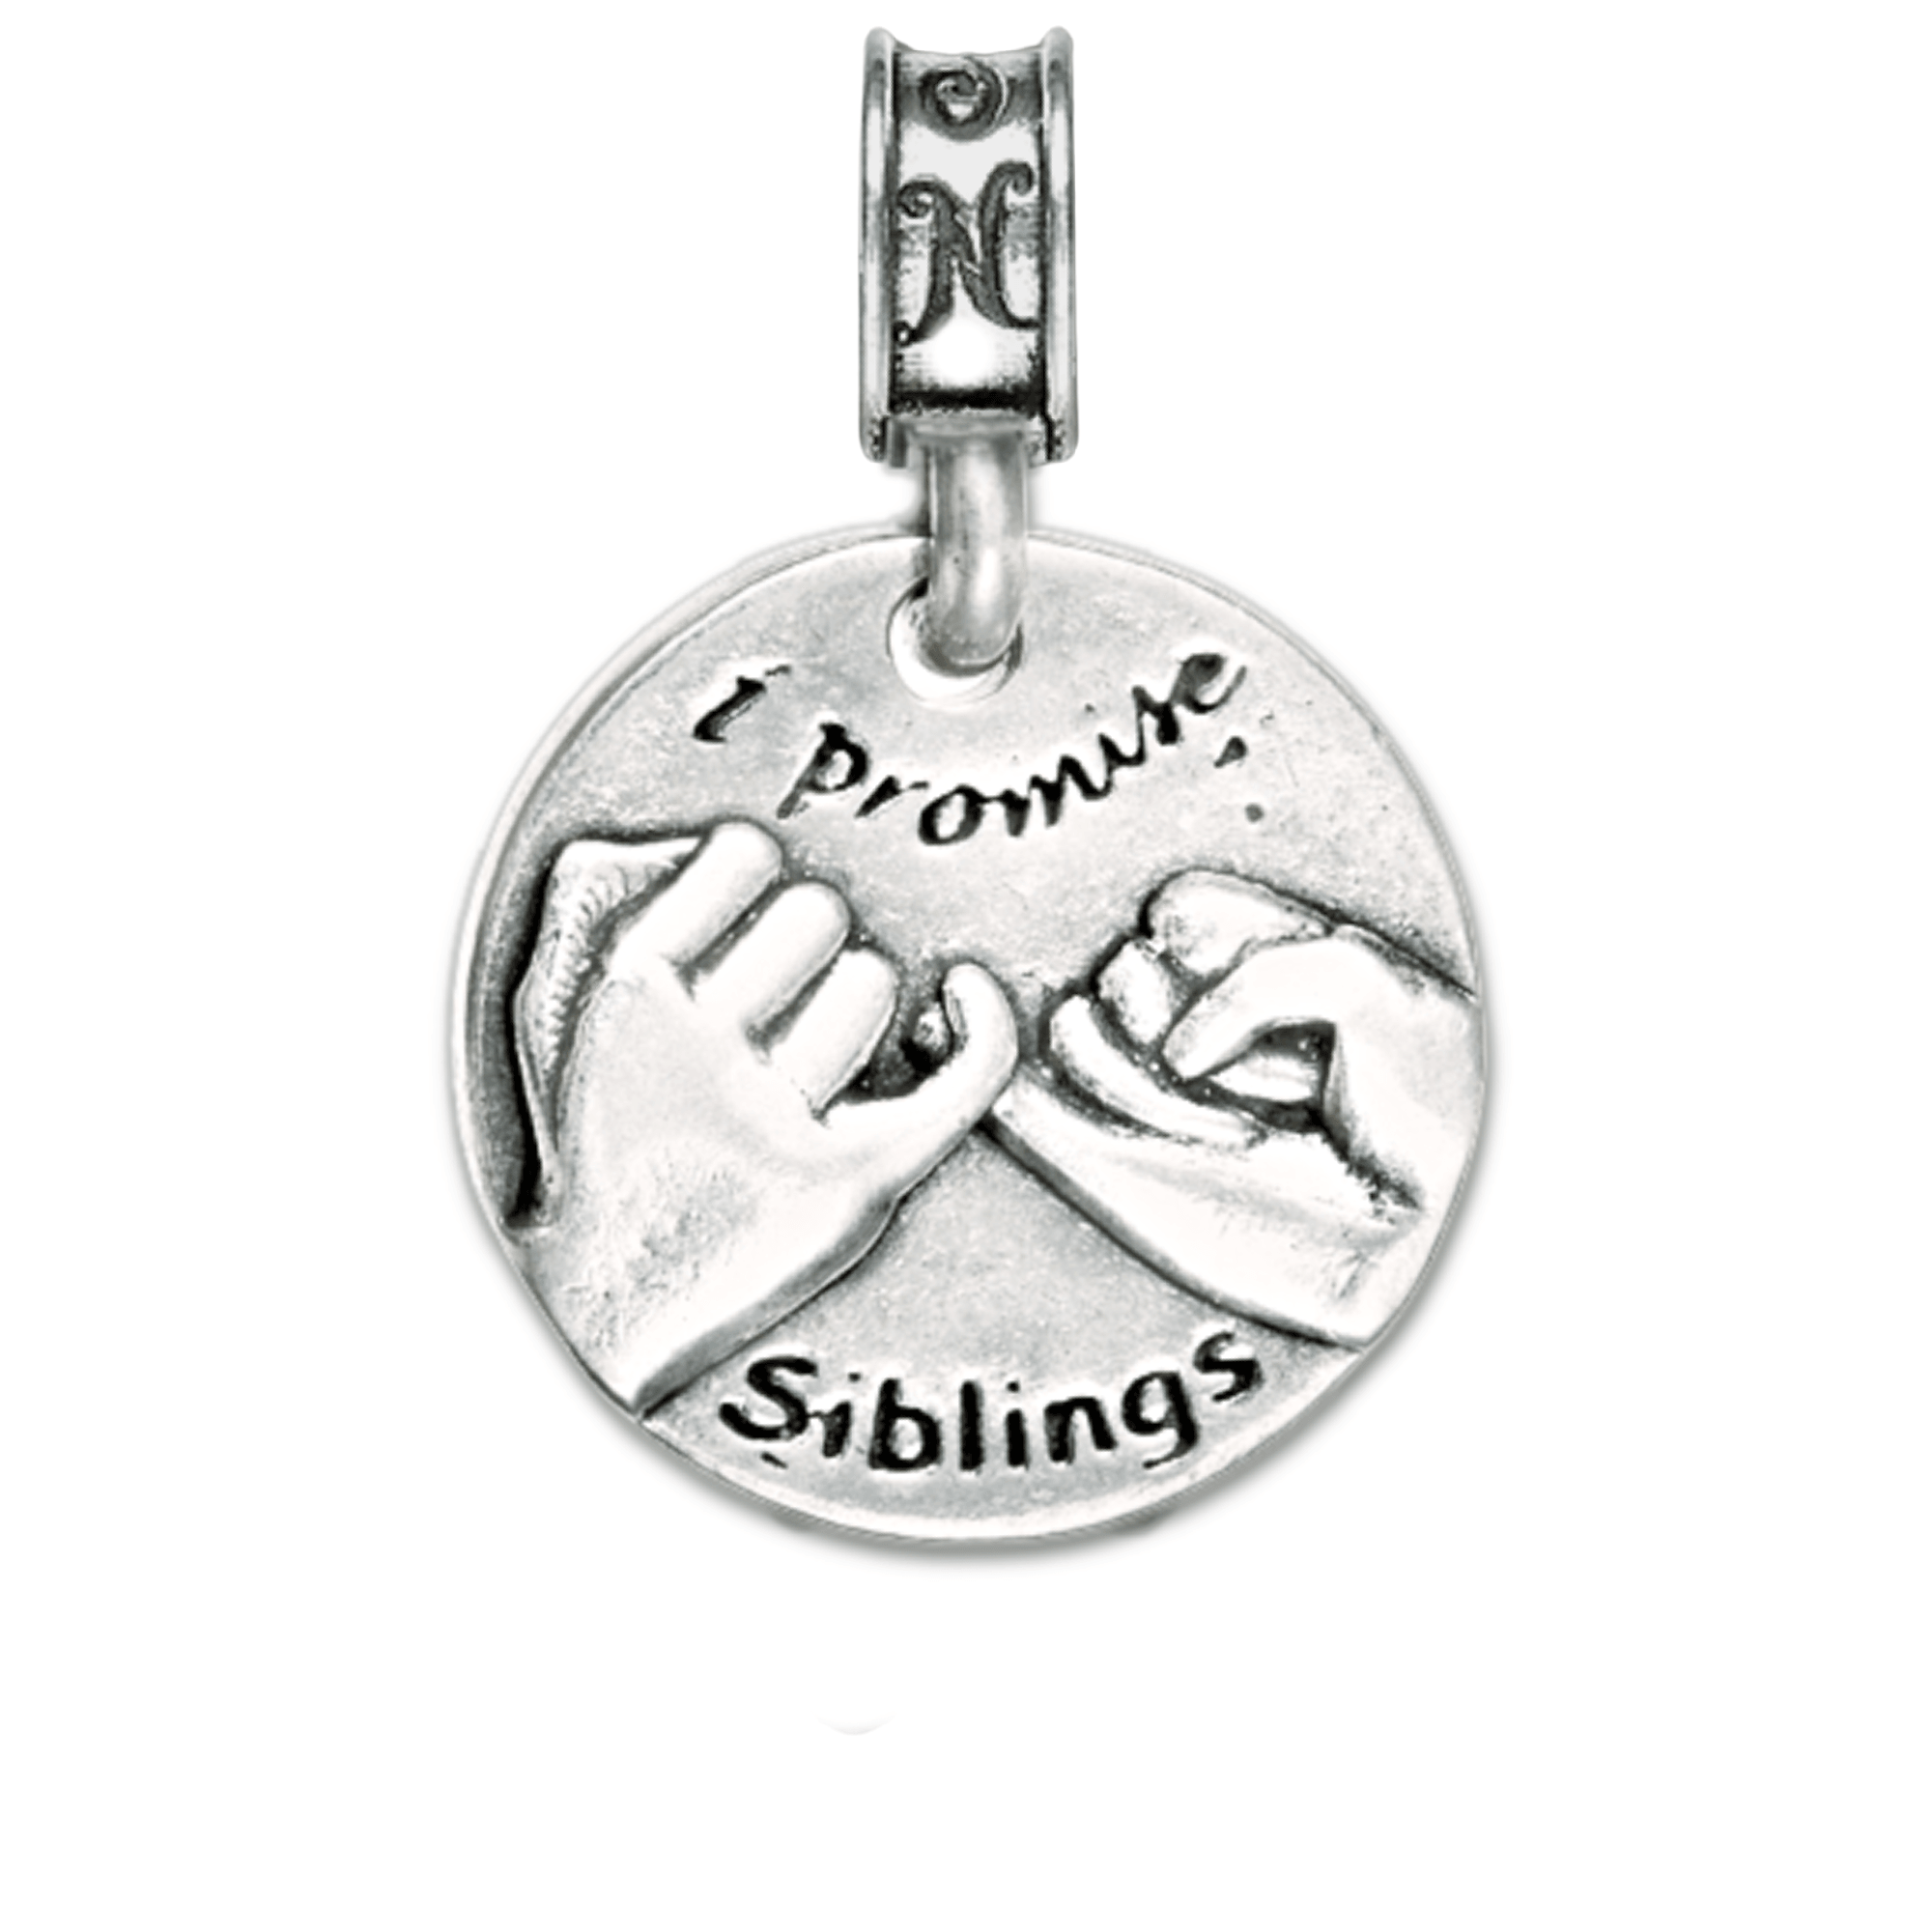 Military Jewelry, Military Charms, Military Gifts, Sibling Charm